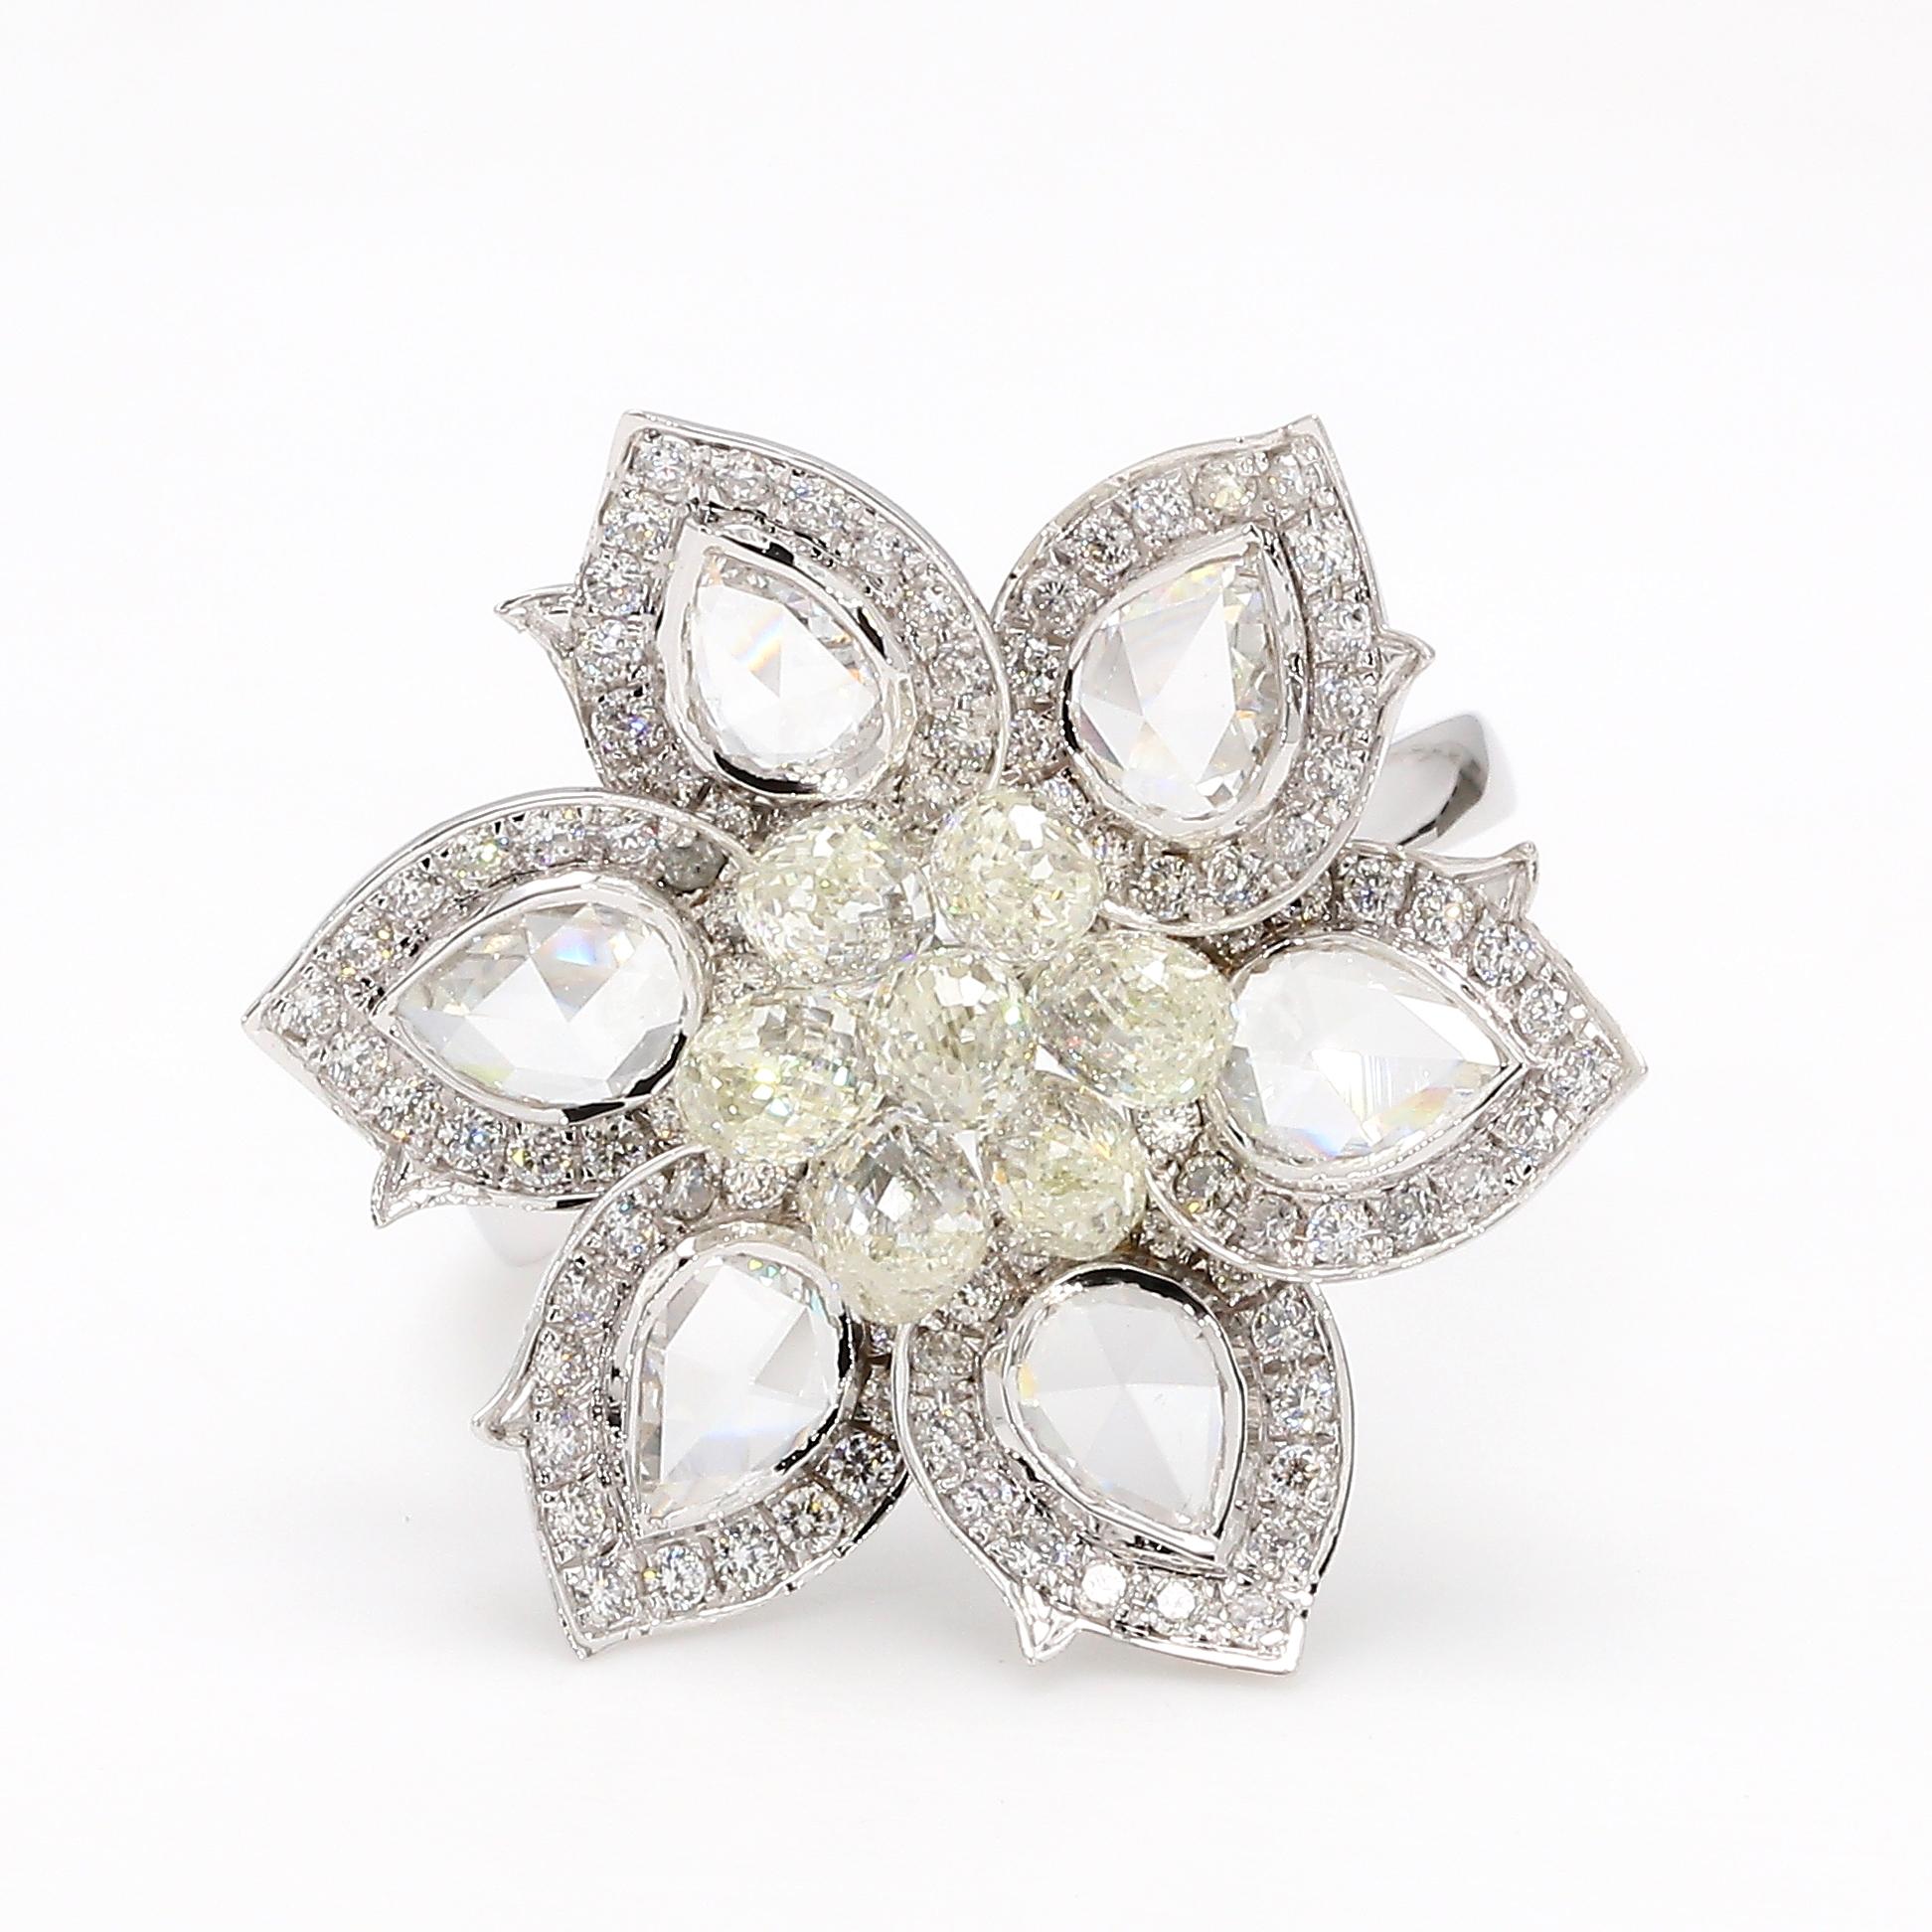 PANIM 4.41 CTS PEARS & BRIOLETTE FLOWER RING 18K WHITE GOLD

A beautiful rendition of the narcissus flower, The Thea features six rose cut pear diamonds, centered with diamond Briolette .This ring is a matching ring to our PANIM Rosecut & Briolette